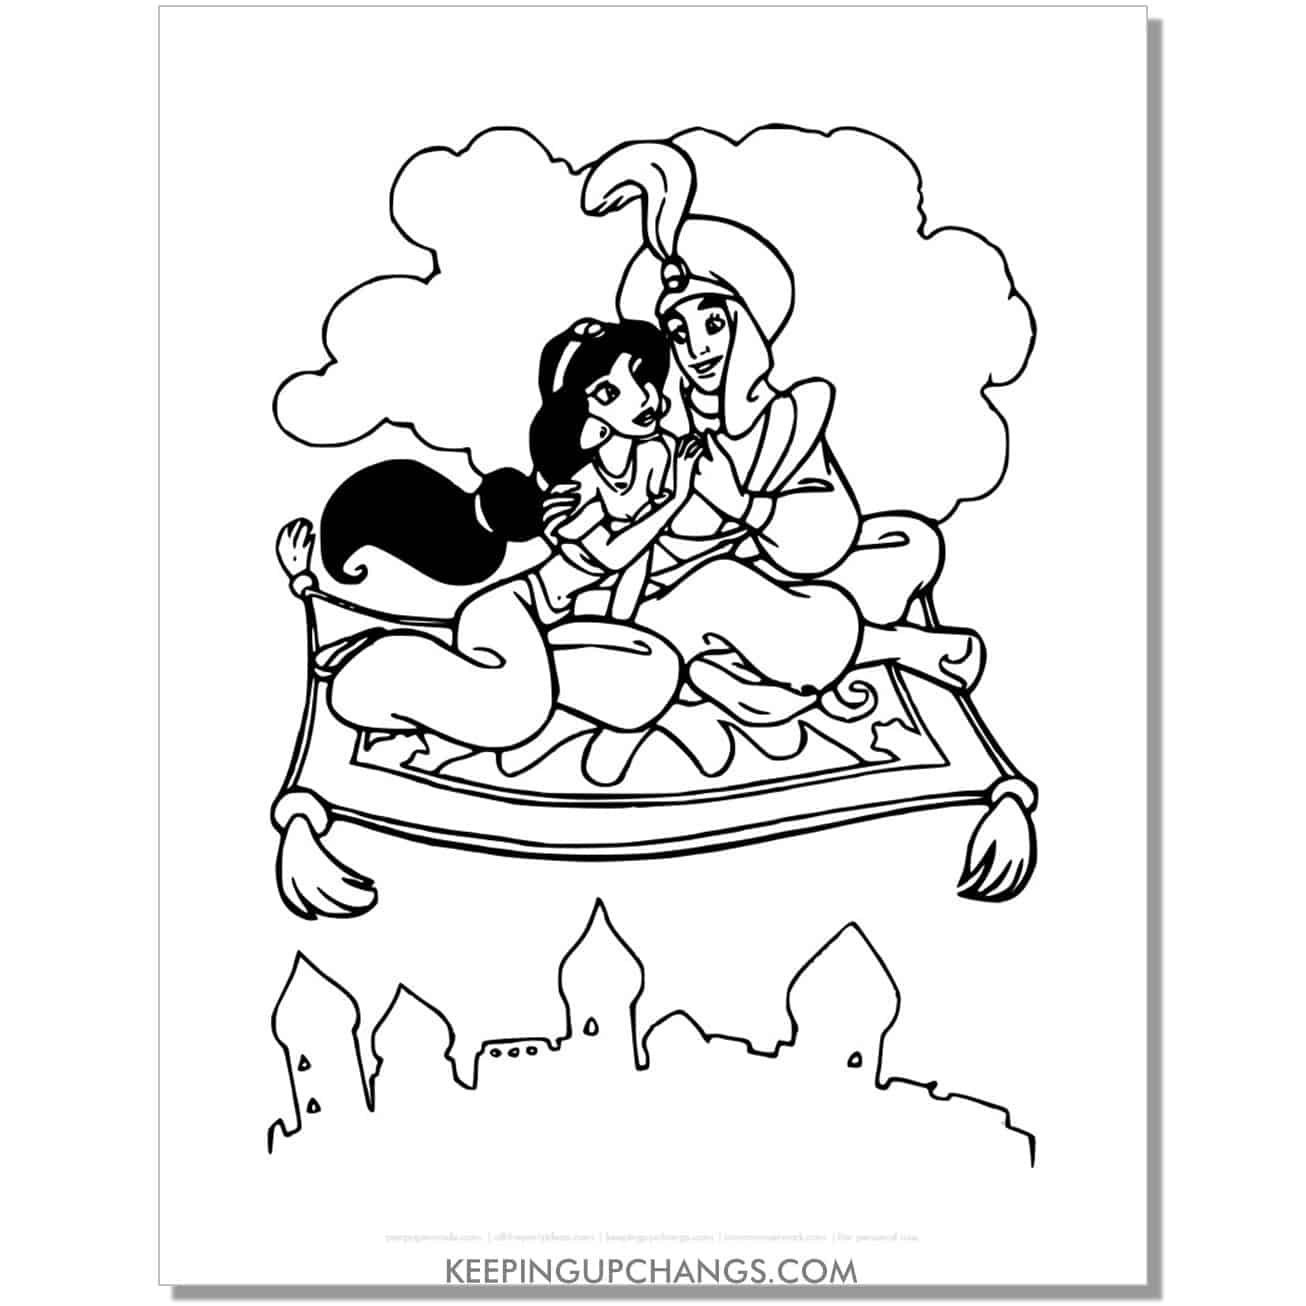 jasmine and aladdin flying above skyline coloring page, sheet.